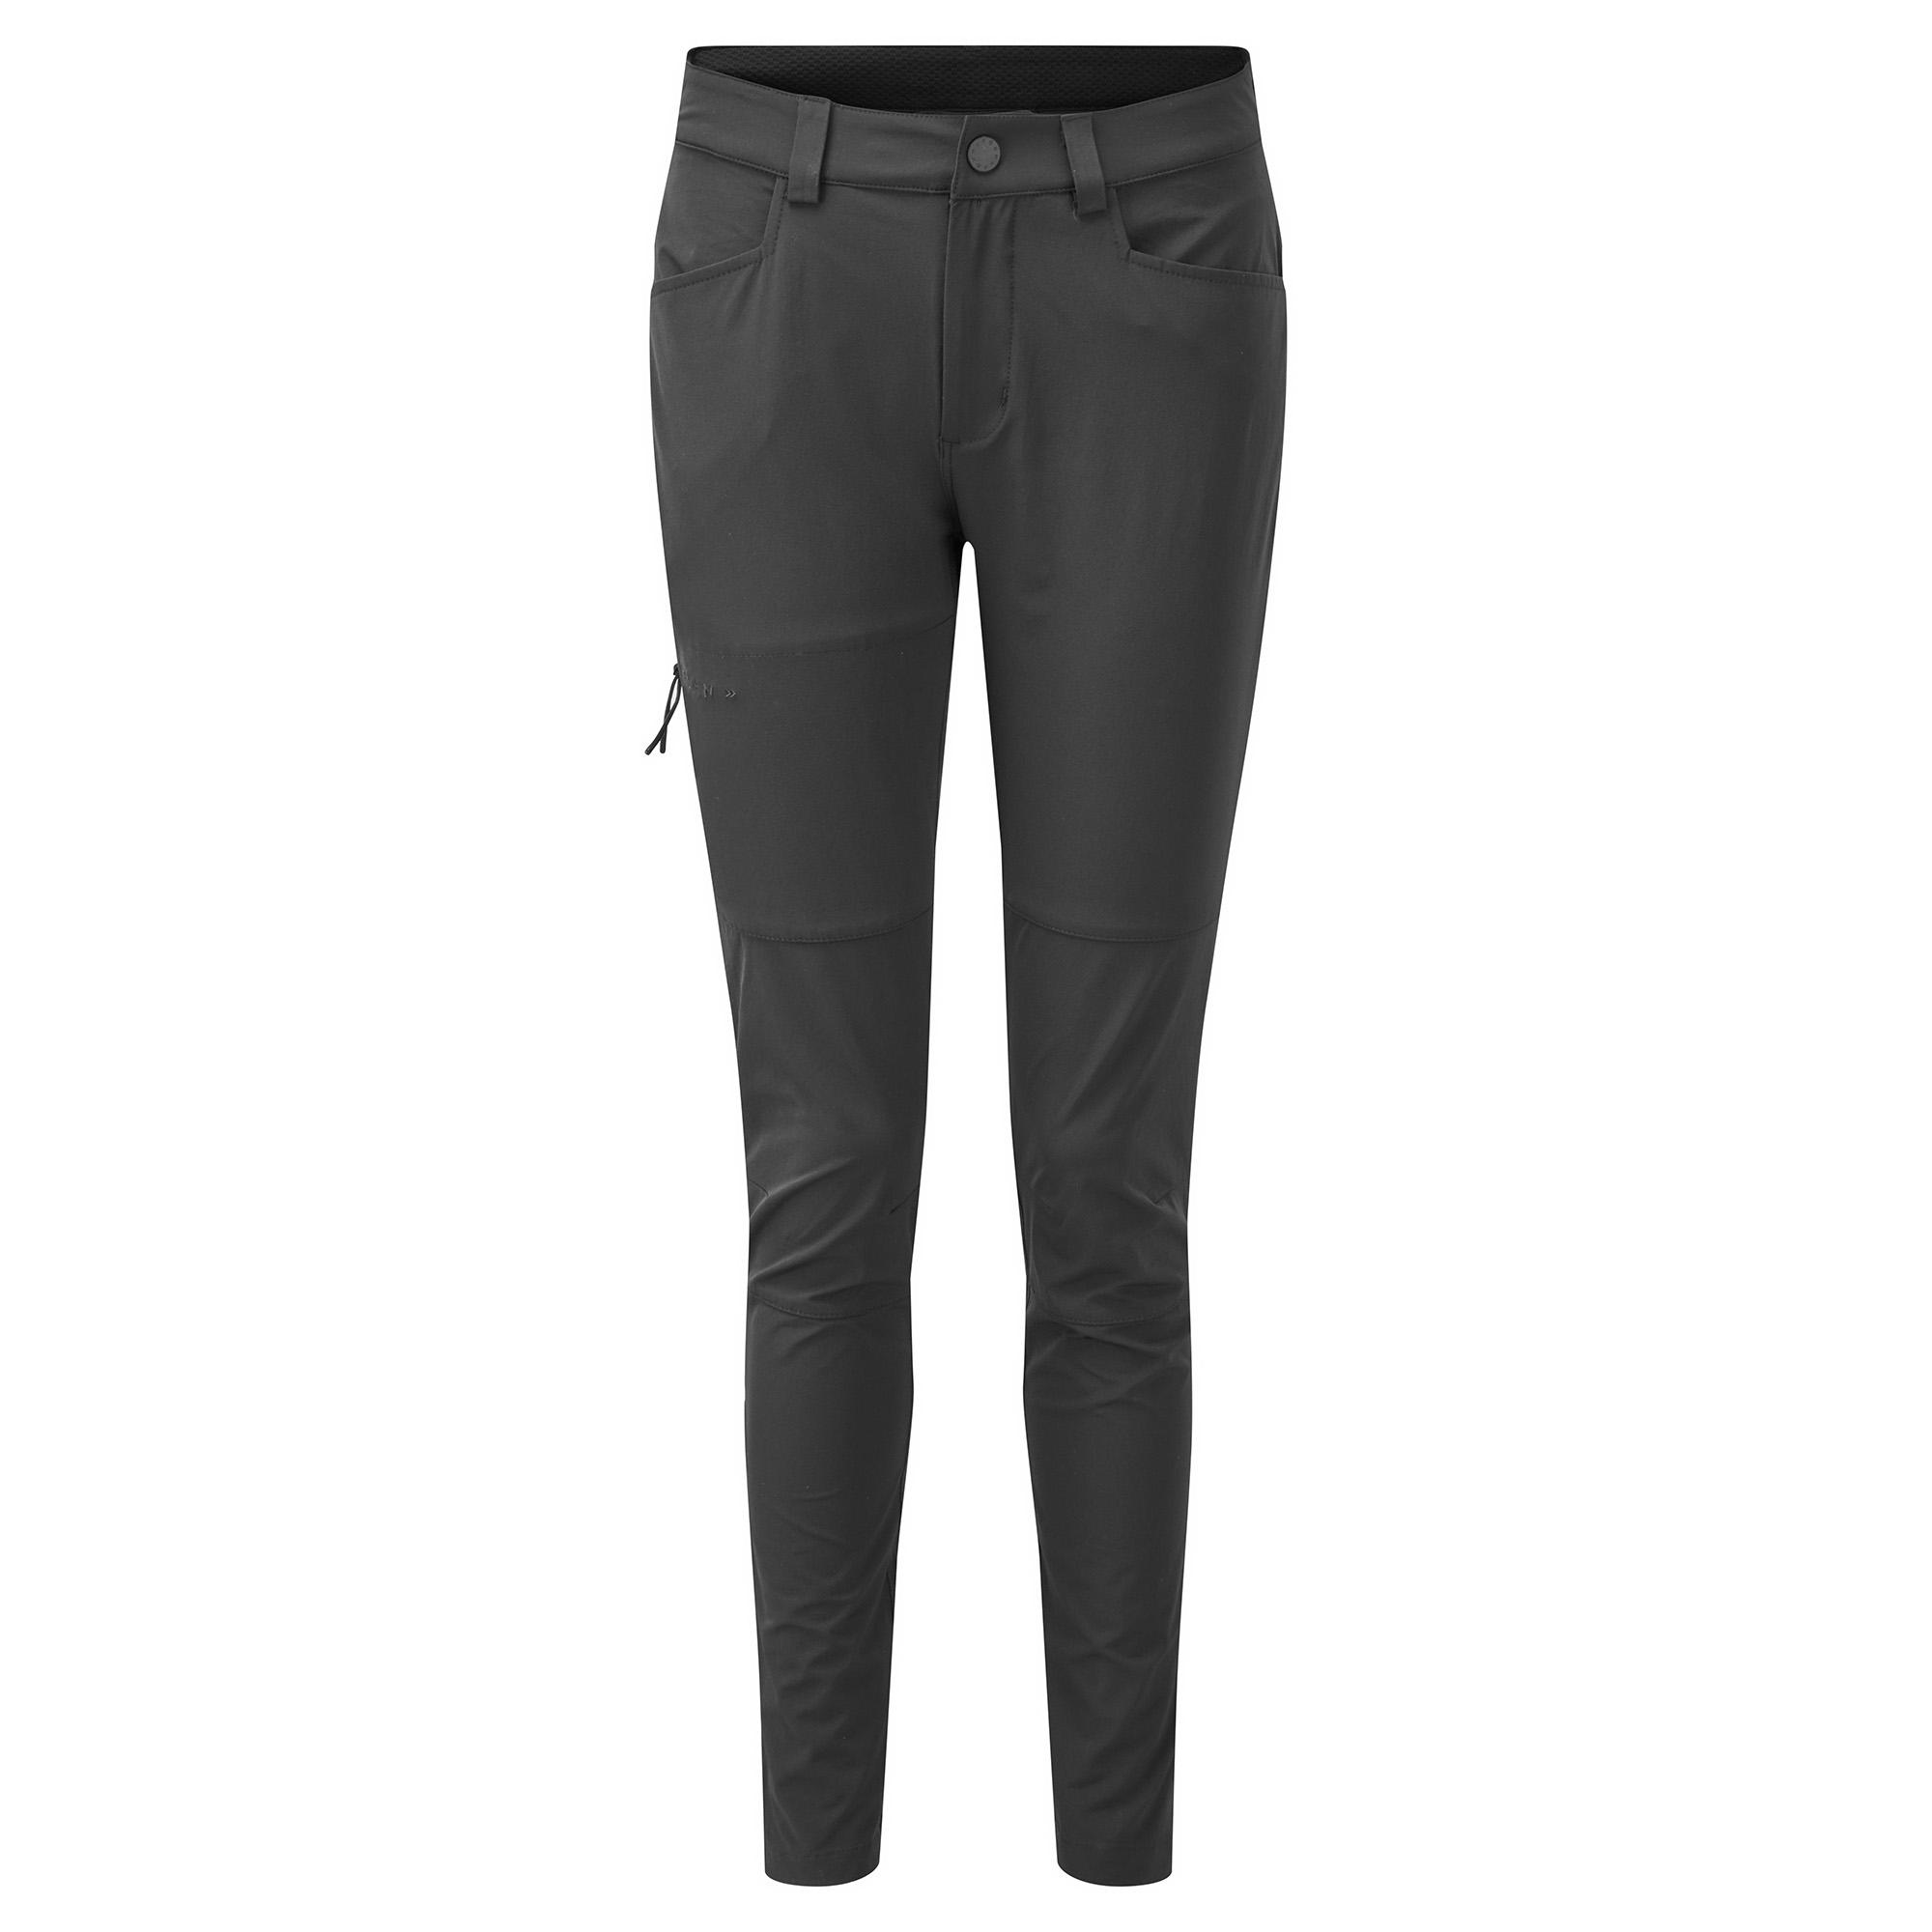 Fhn Womens Lightweight Trail Trousers - Black